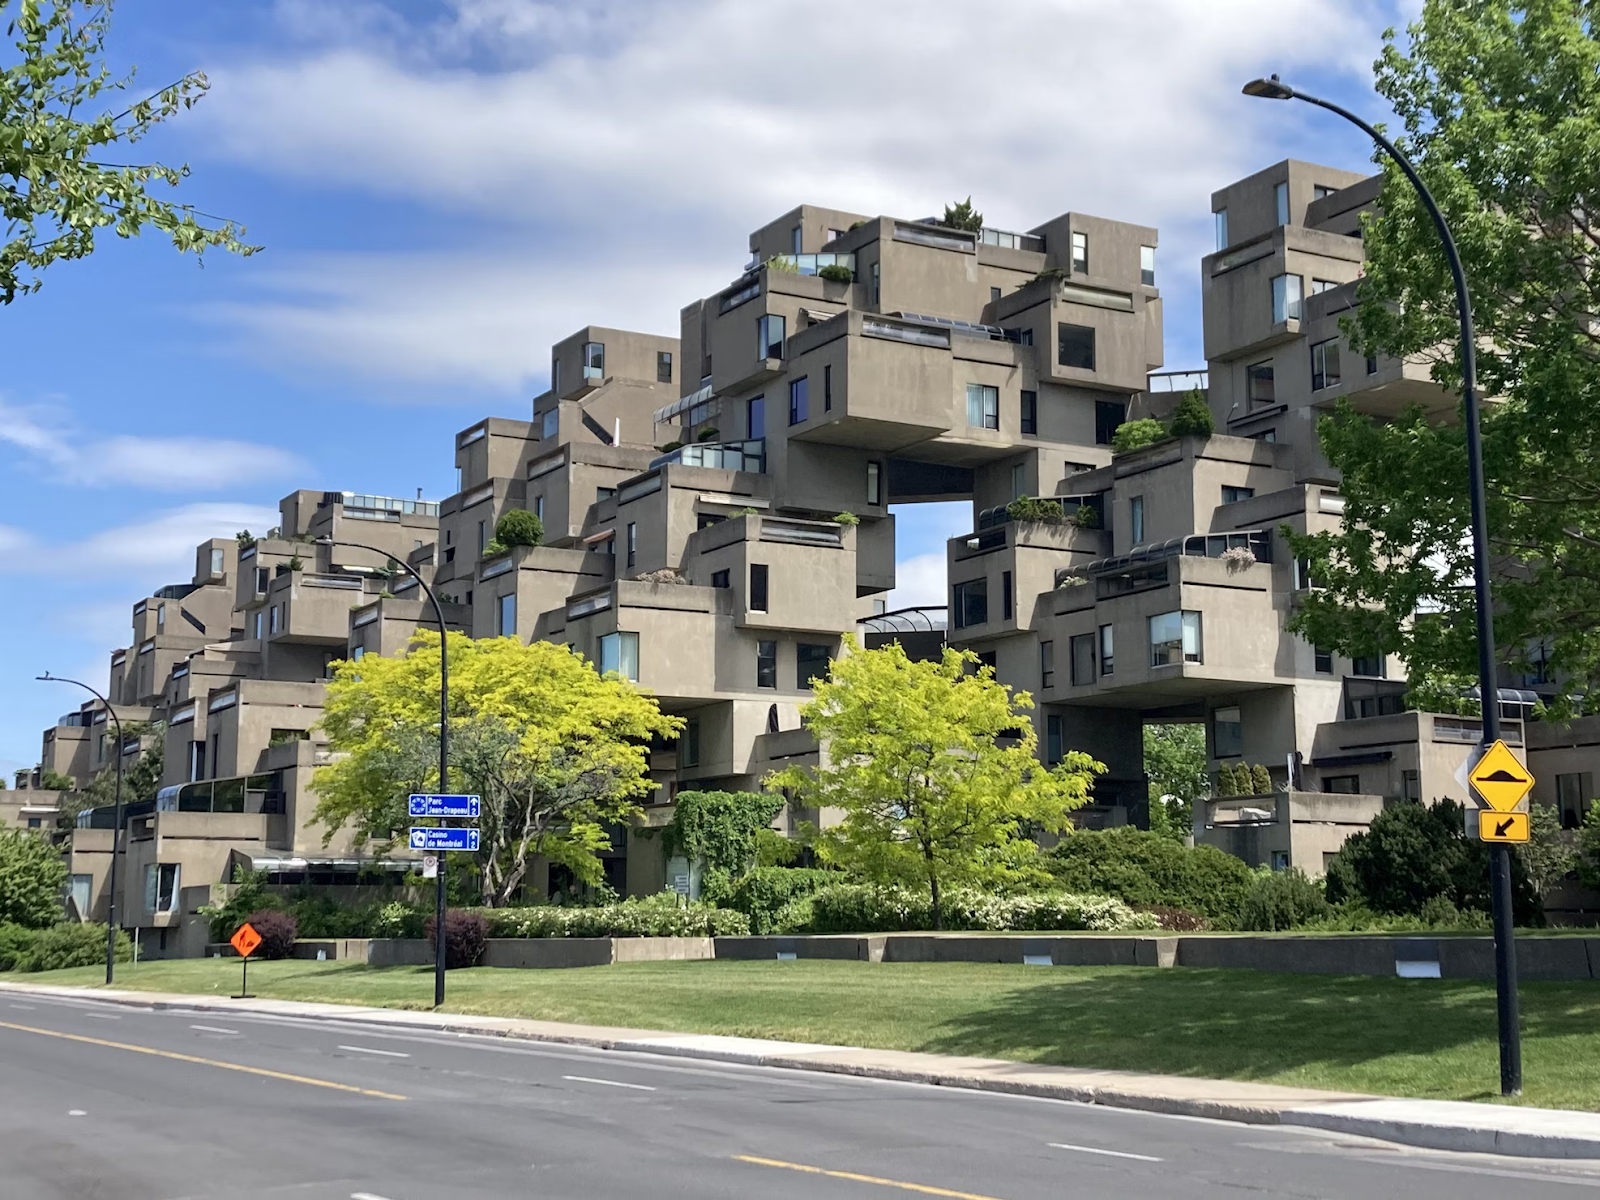 Street View Image of Habitat 67 Featuring a Row of Buildings With Unique Brutalist Design.